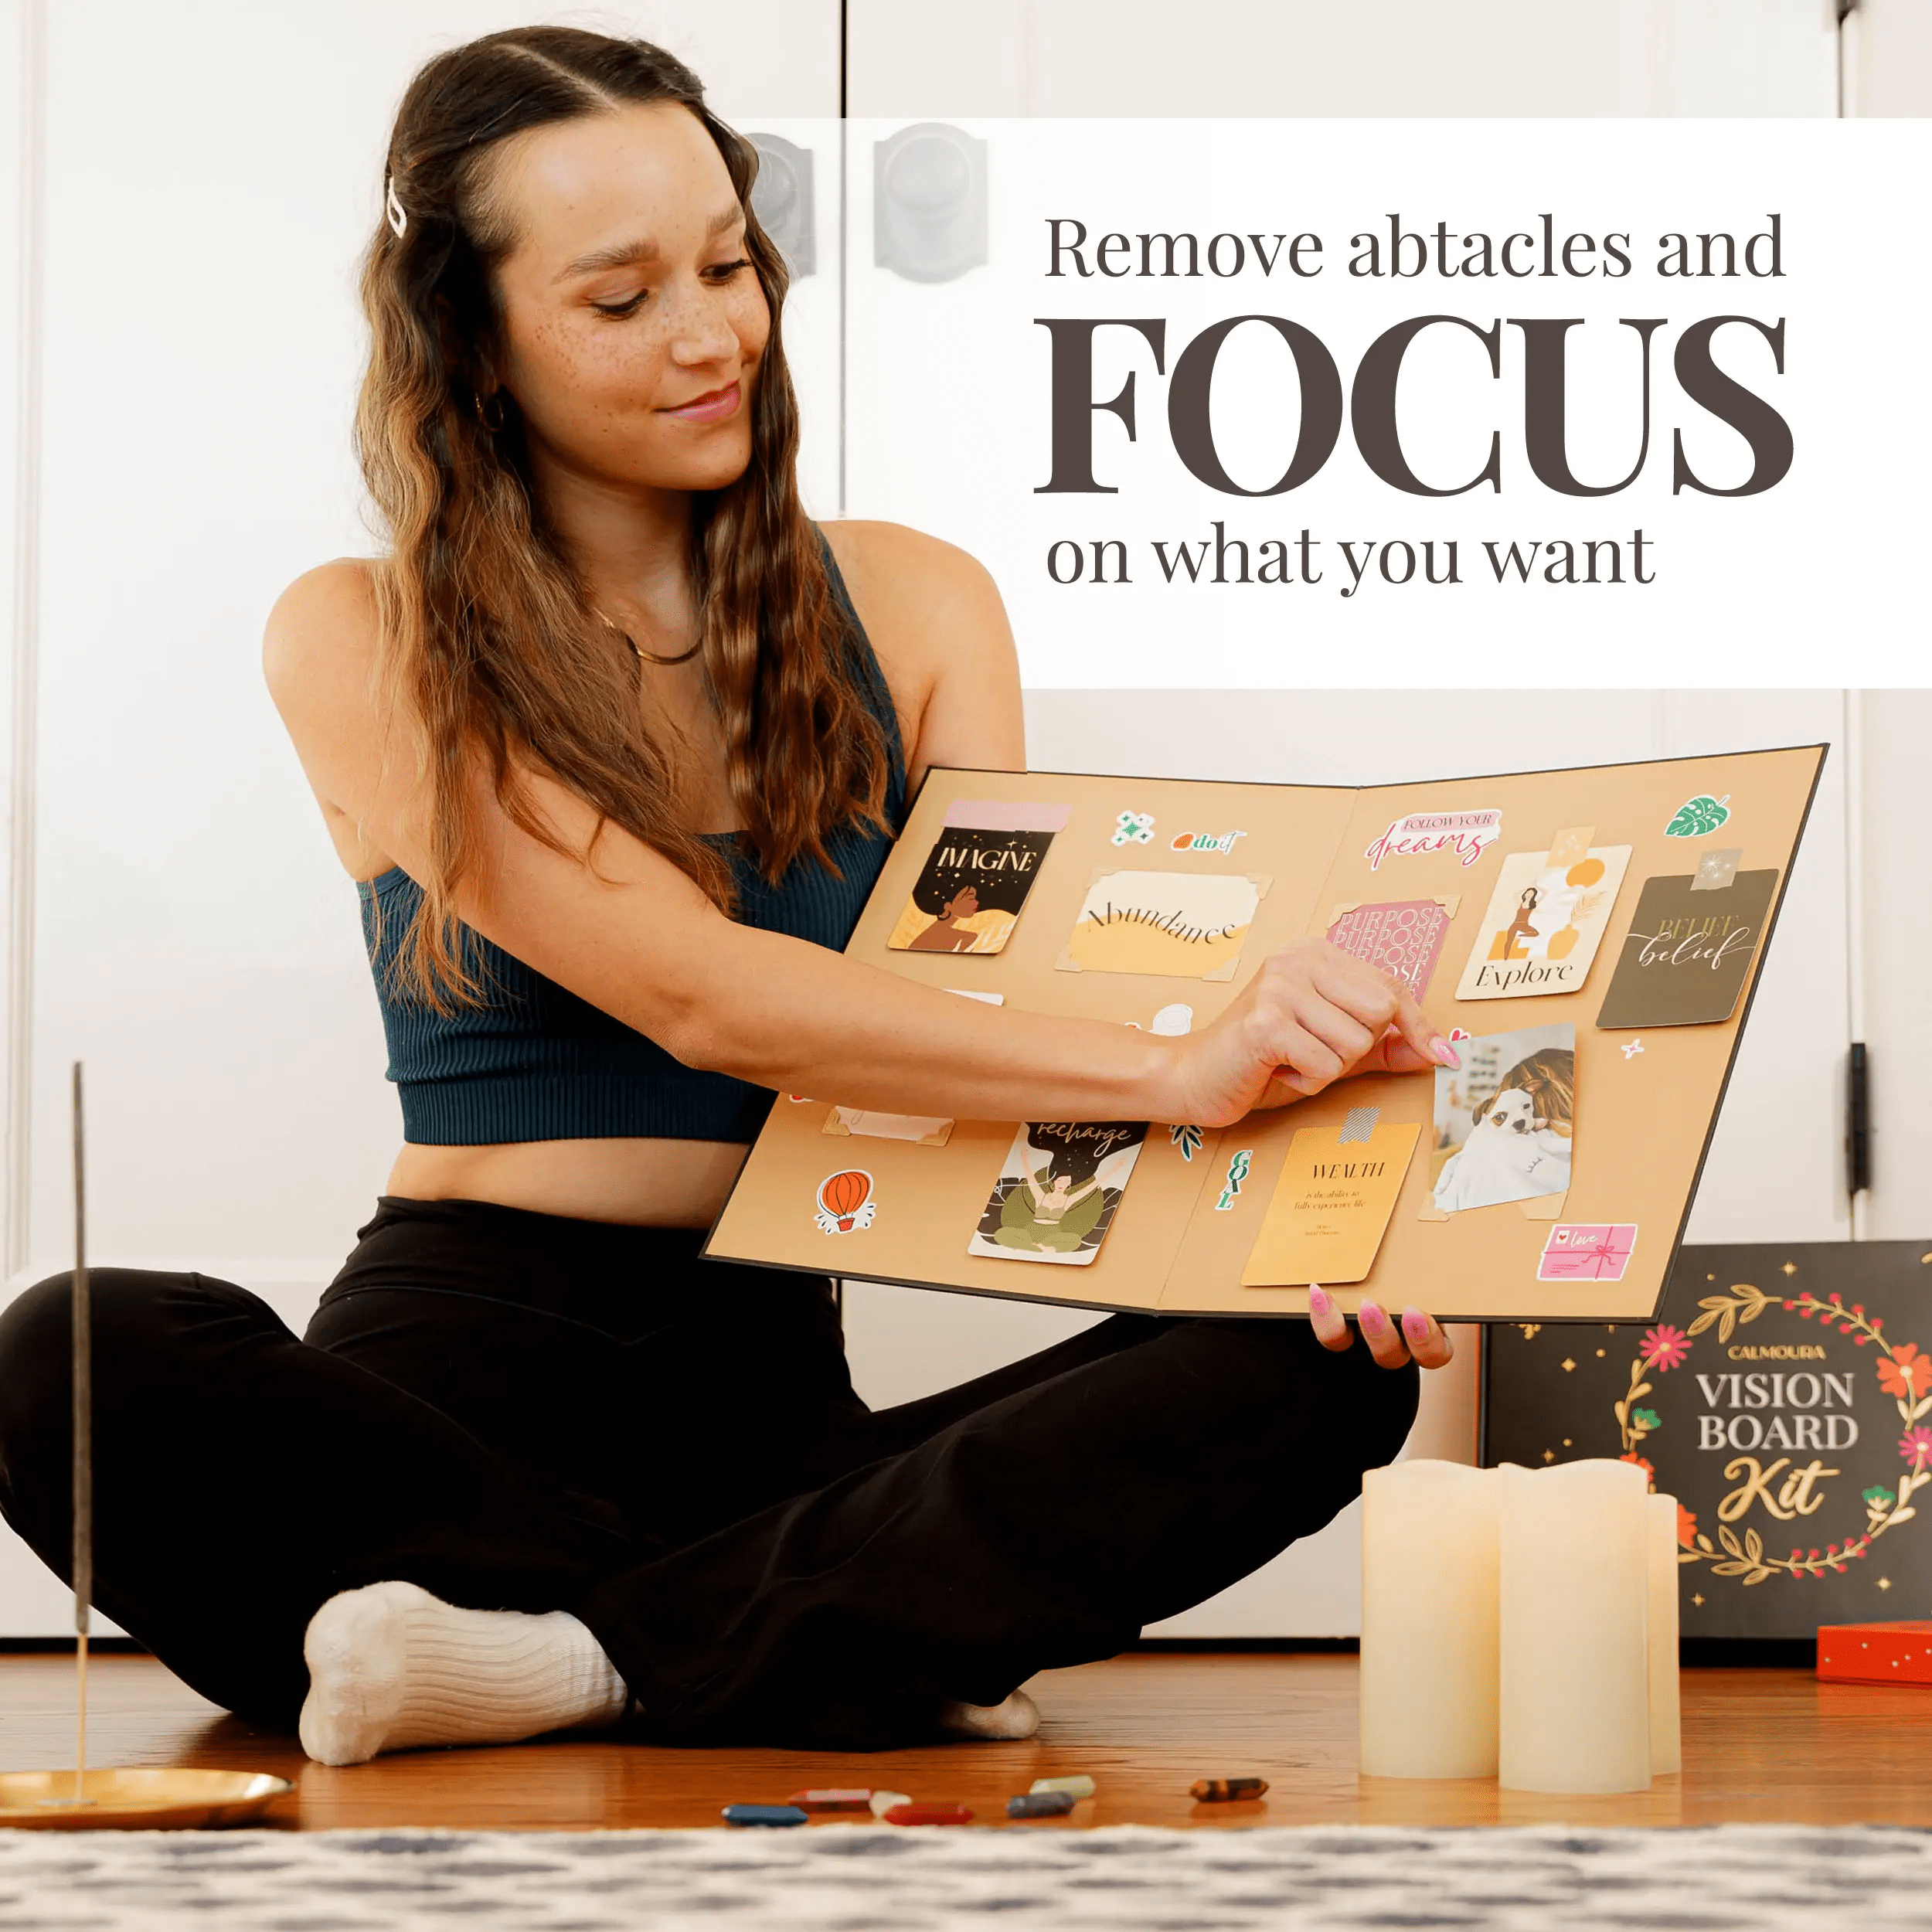 Calmoura Vision Board Kit for Beginners (100 Cards, 1 Card Box, 1 Guidebook & Exercises, 4 Vision Board Stickers, Washi Sheets, & More)